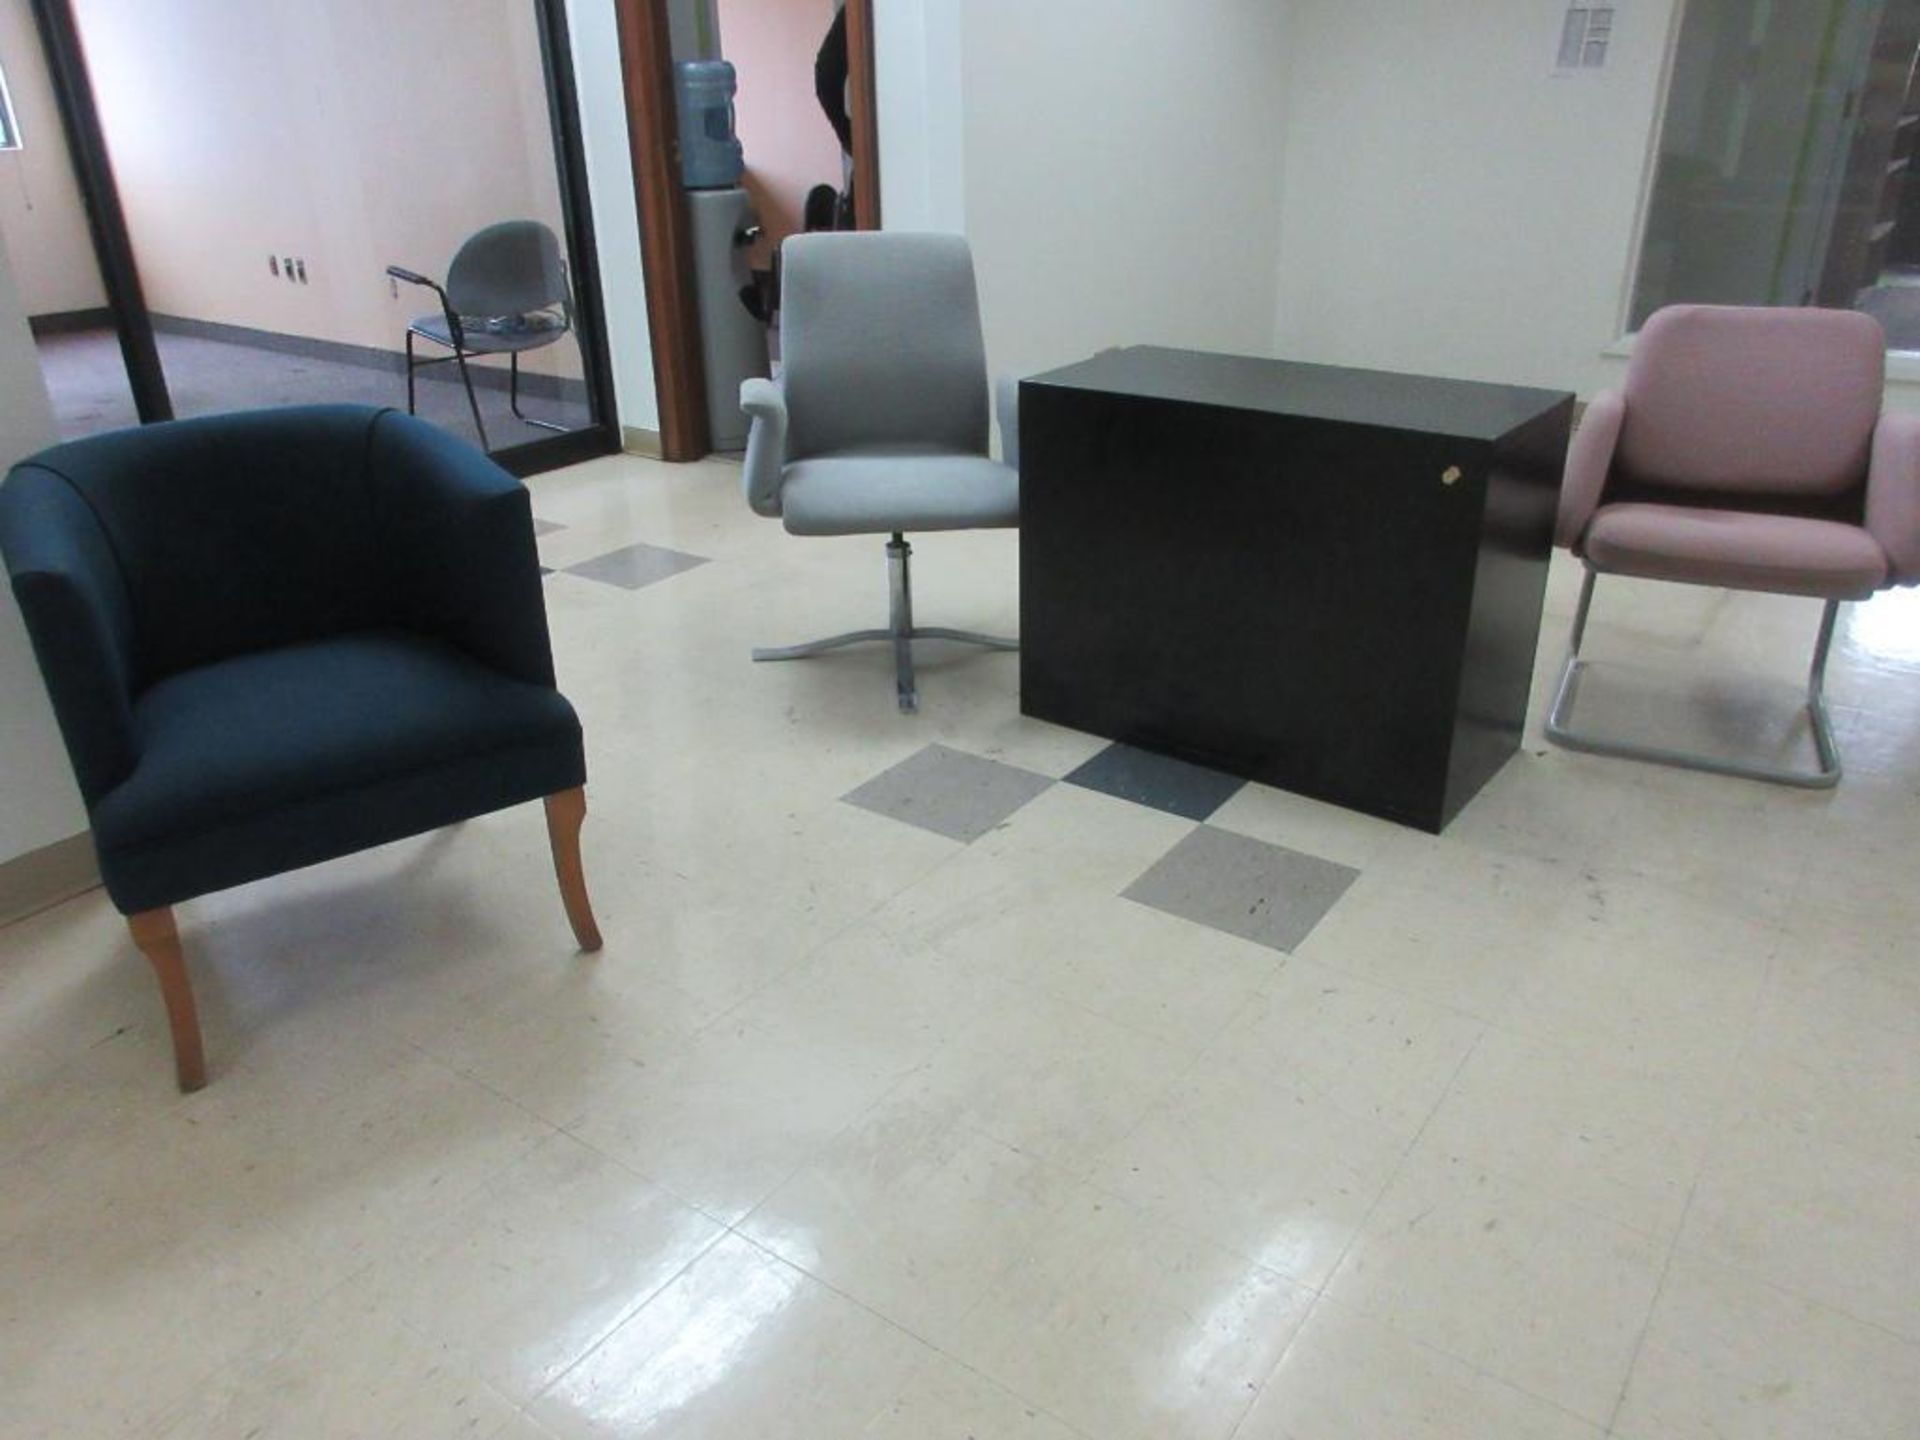 CONTENTS OF WORK AREA INCL 2 DESKS, 9 CHAIRS, 4 FILE CABINETS (OFFICES 2ND FLOOR) - Image 3 of 8